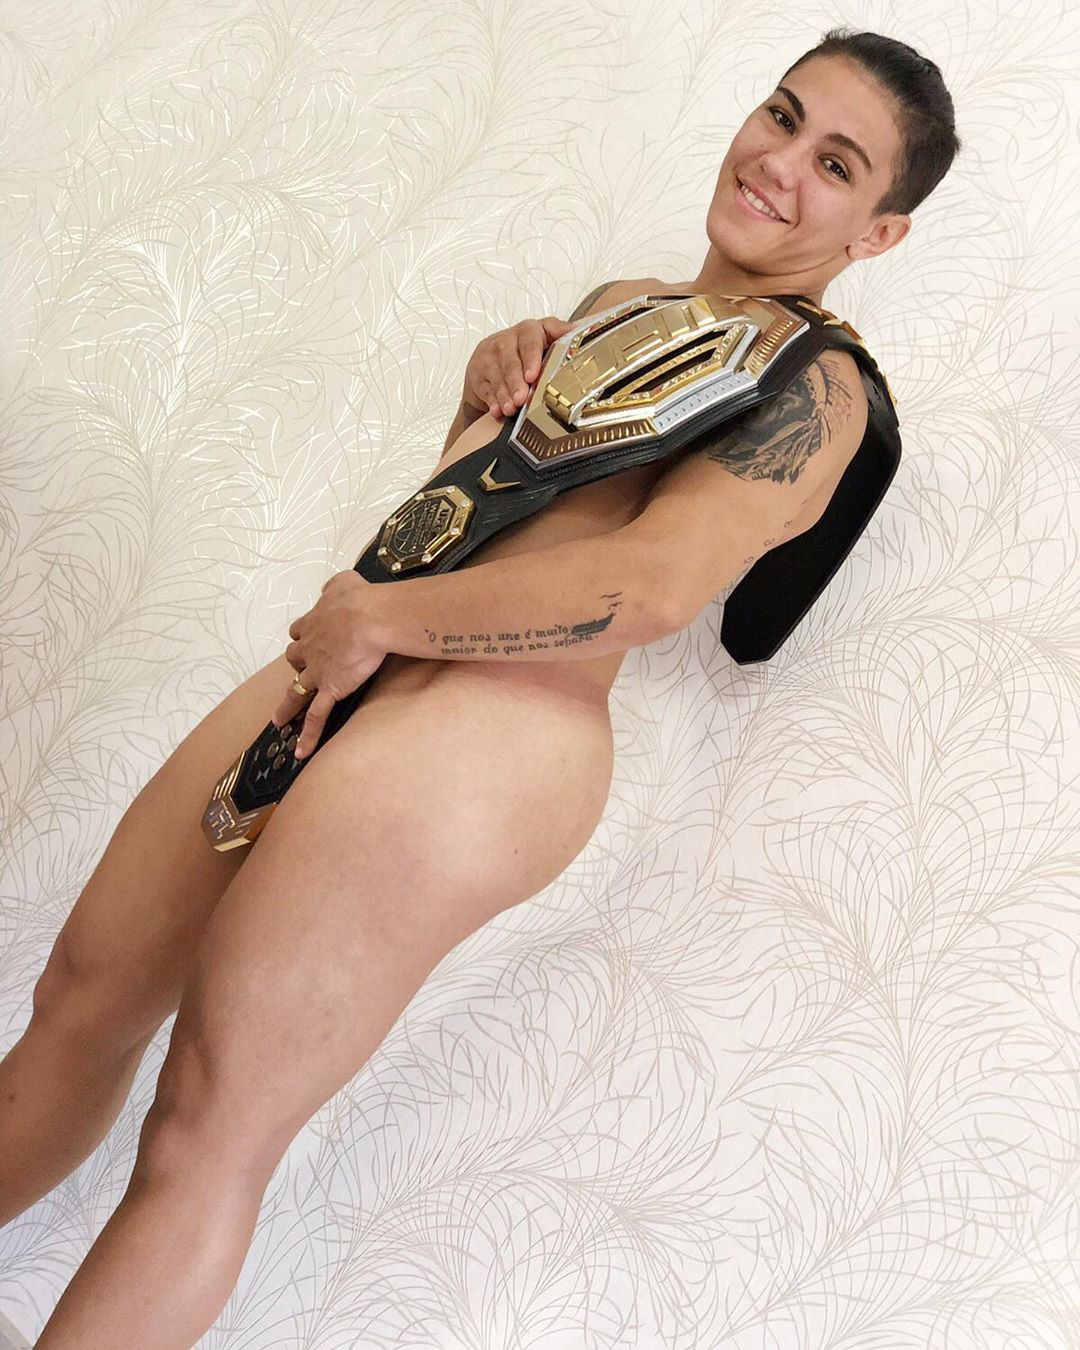 New UFC champ Jessica Andrade poses naked with just belt ...